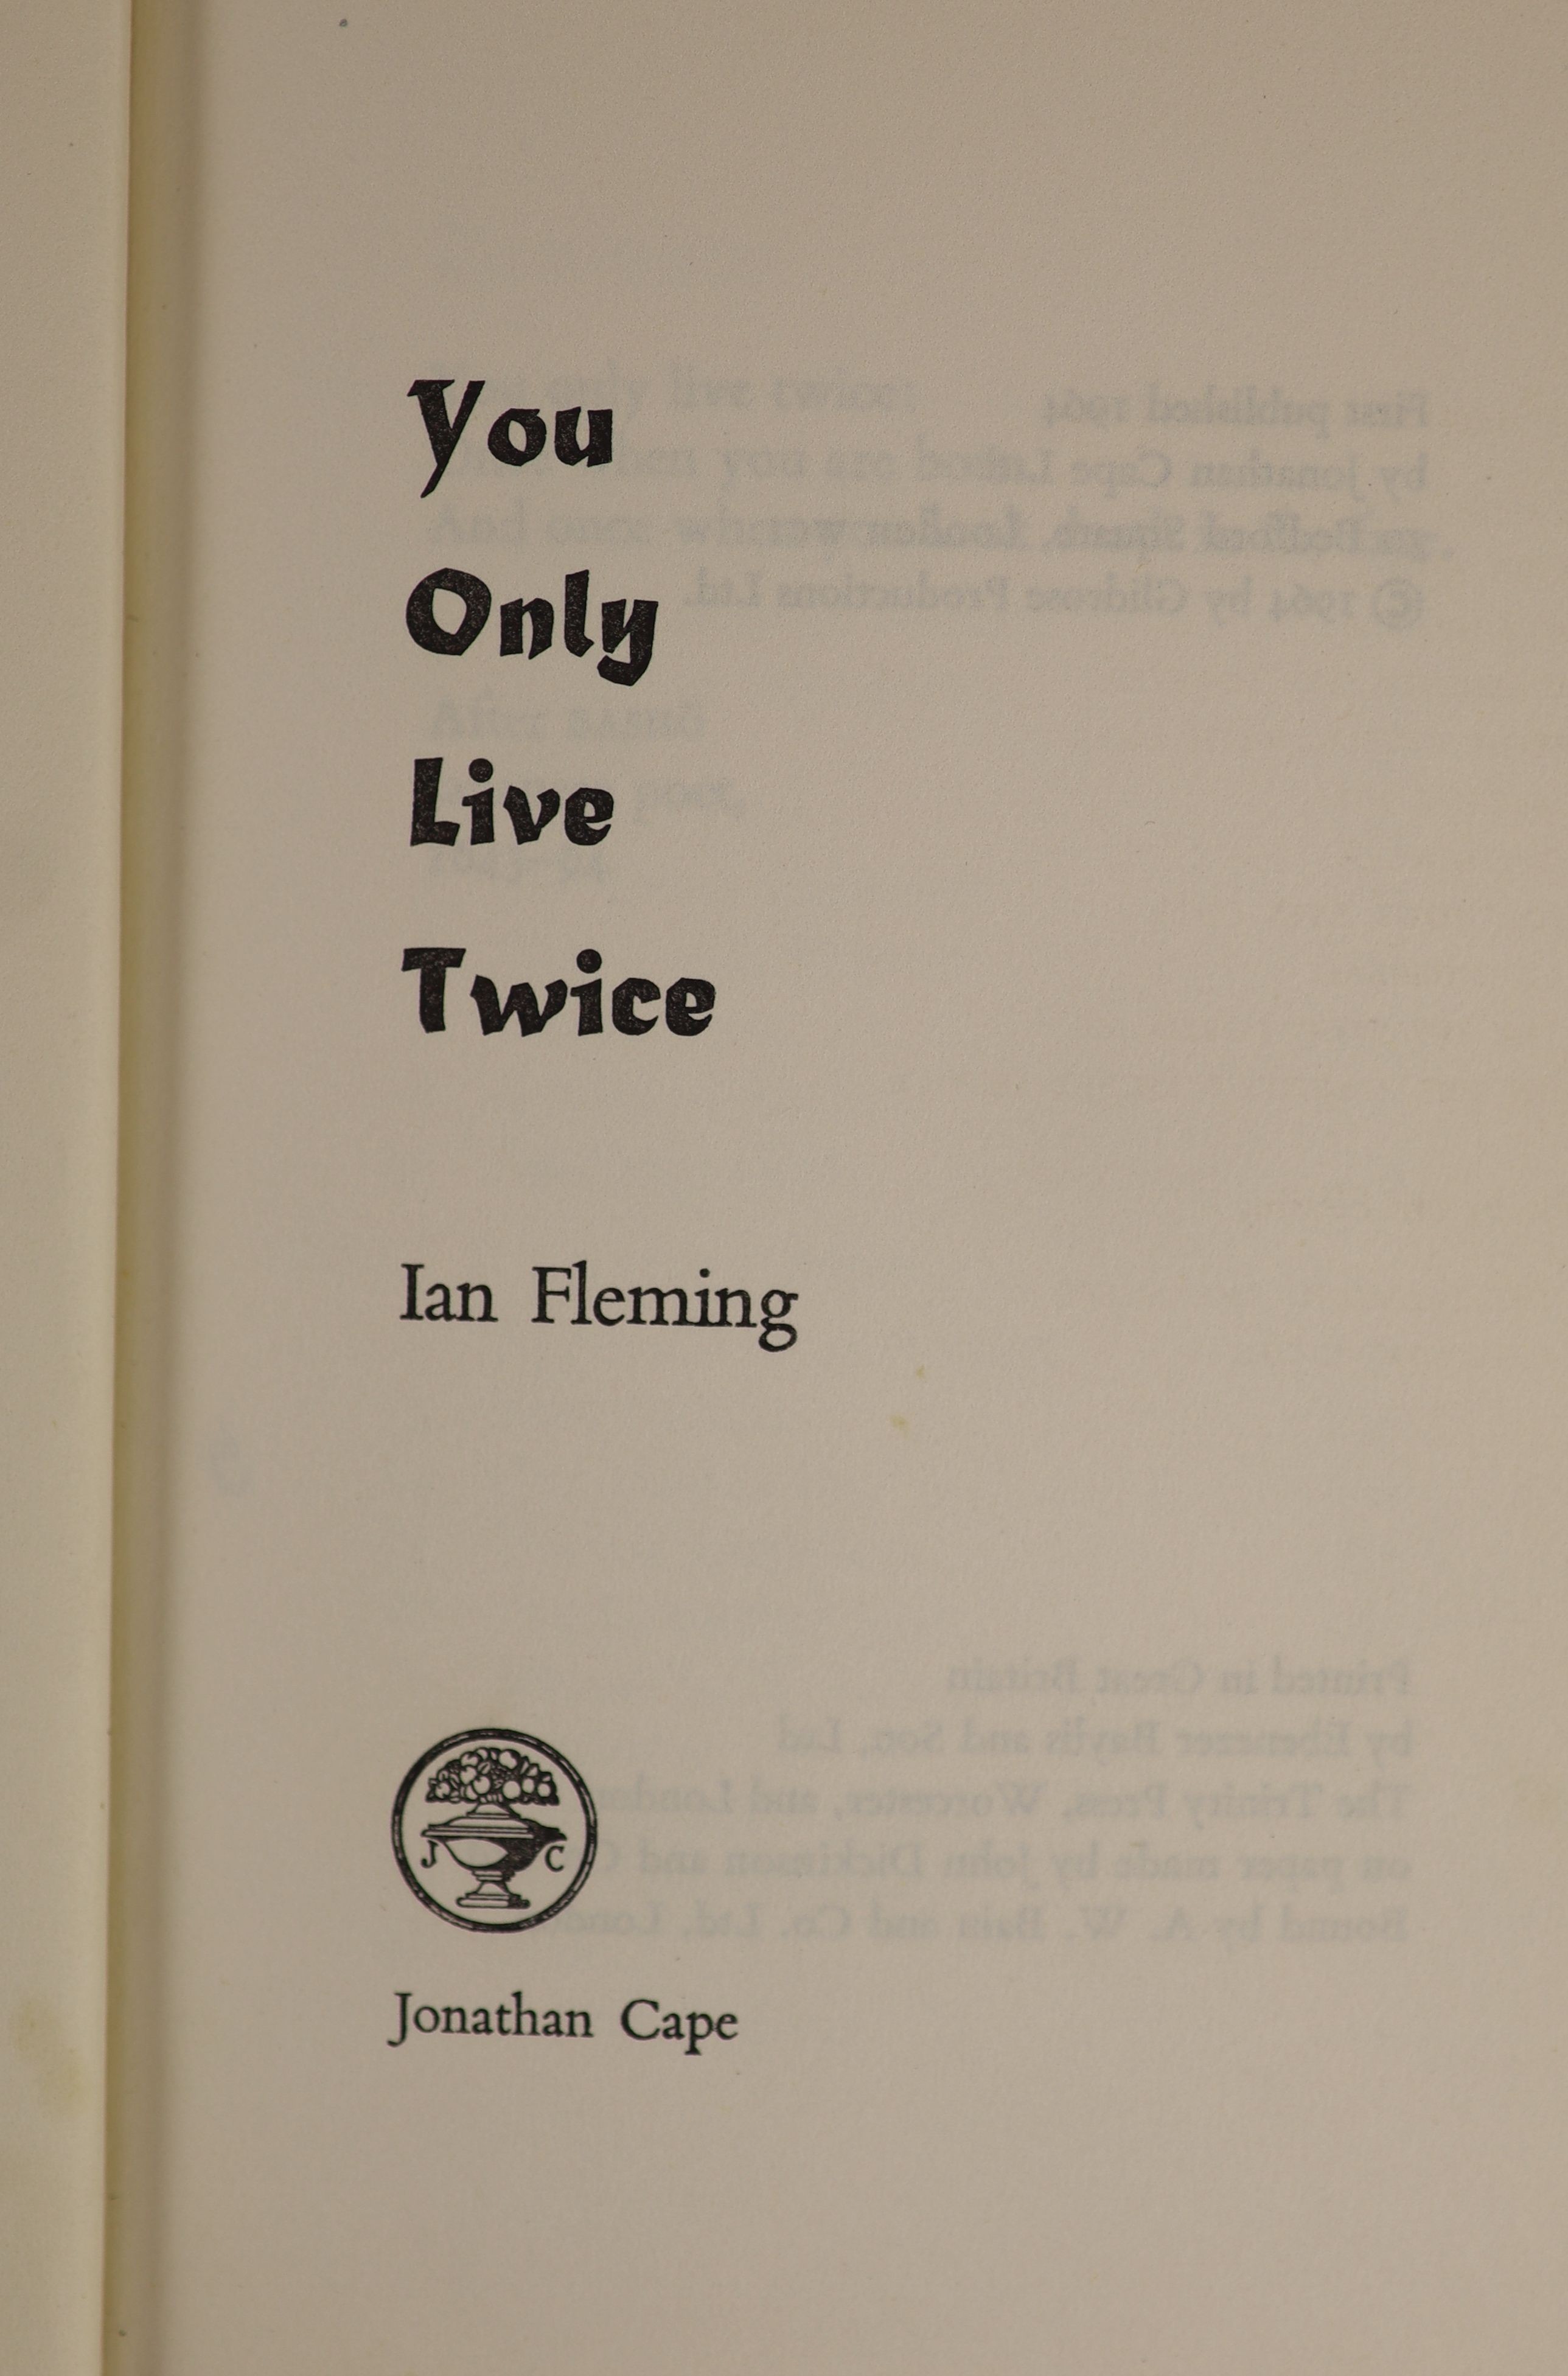 Fleming, Ian - You Only Live Twice, 1st edition, 8vo, black cloth with strip of seven gilt-stamped Japanese characters, with unclipped d/j, Jonathan Cape, London, 1964